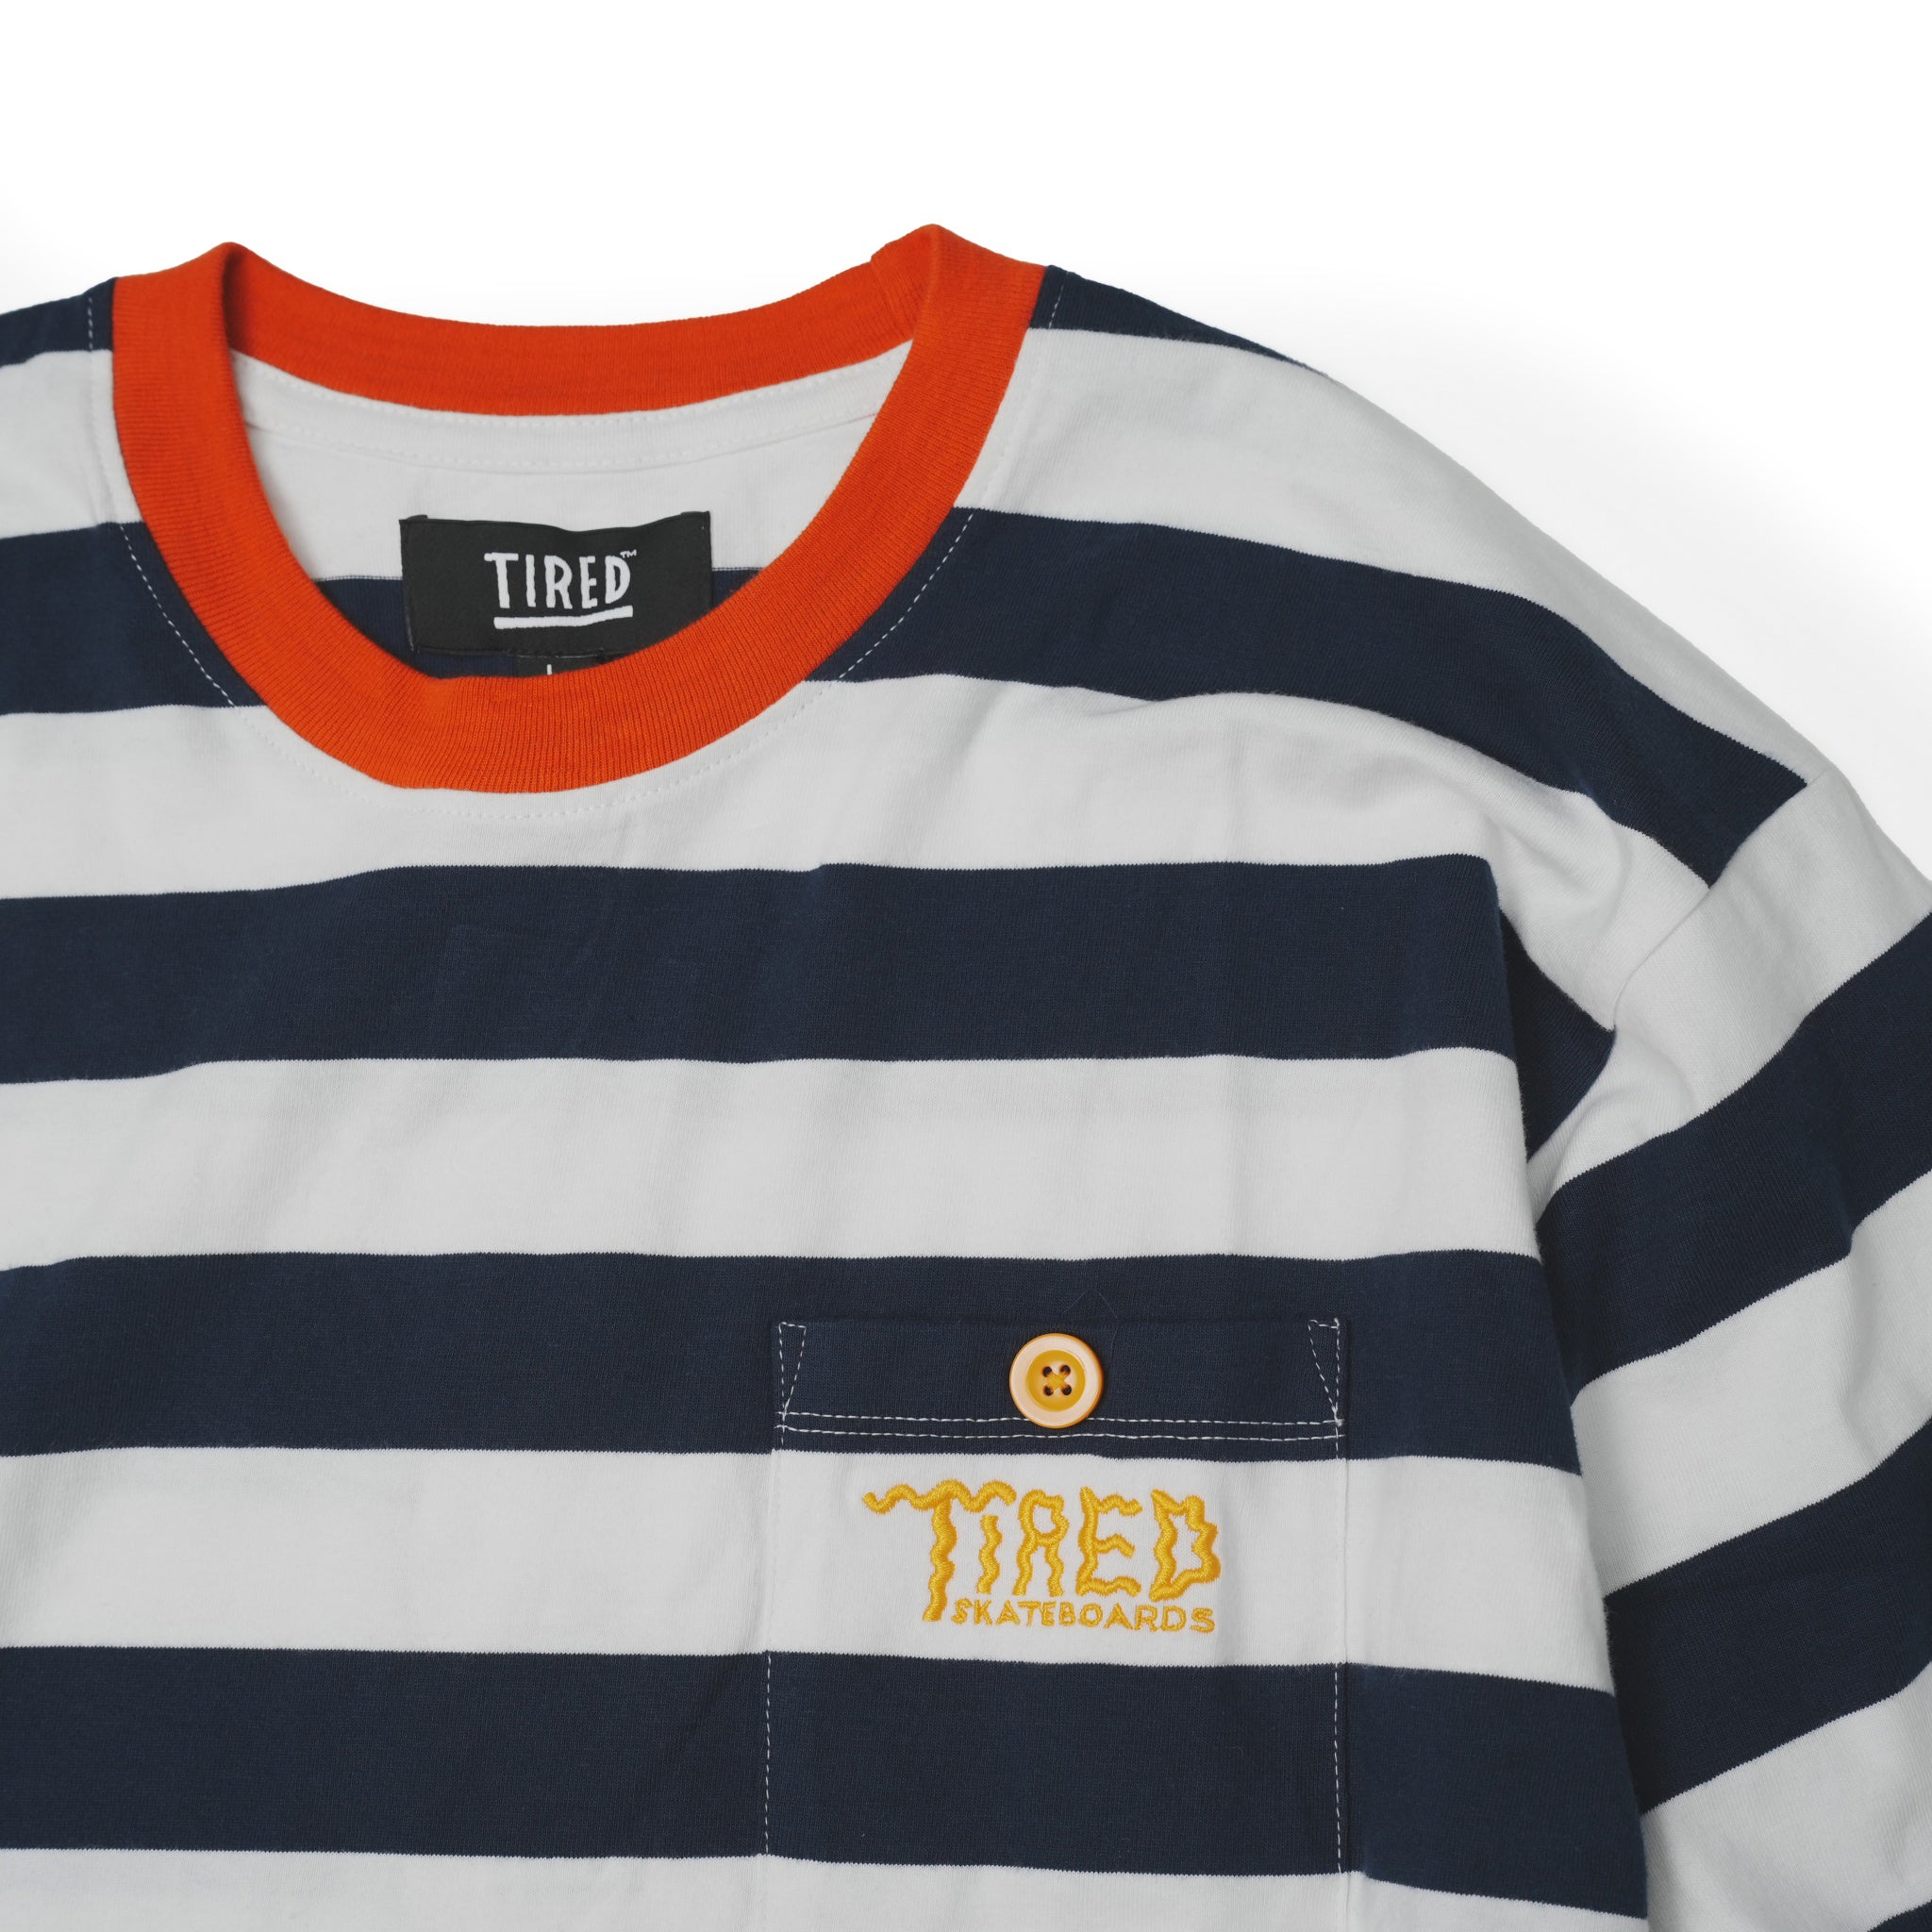 No:TS00313 | Name:SQUIGGLY LOGO STRIPED POCKET LS | Color:Red/Navy【TIRED_タイレッド】